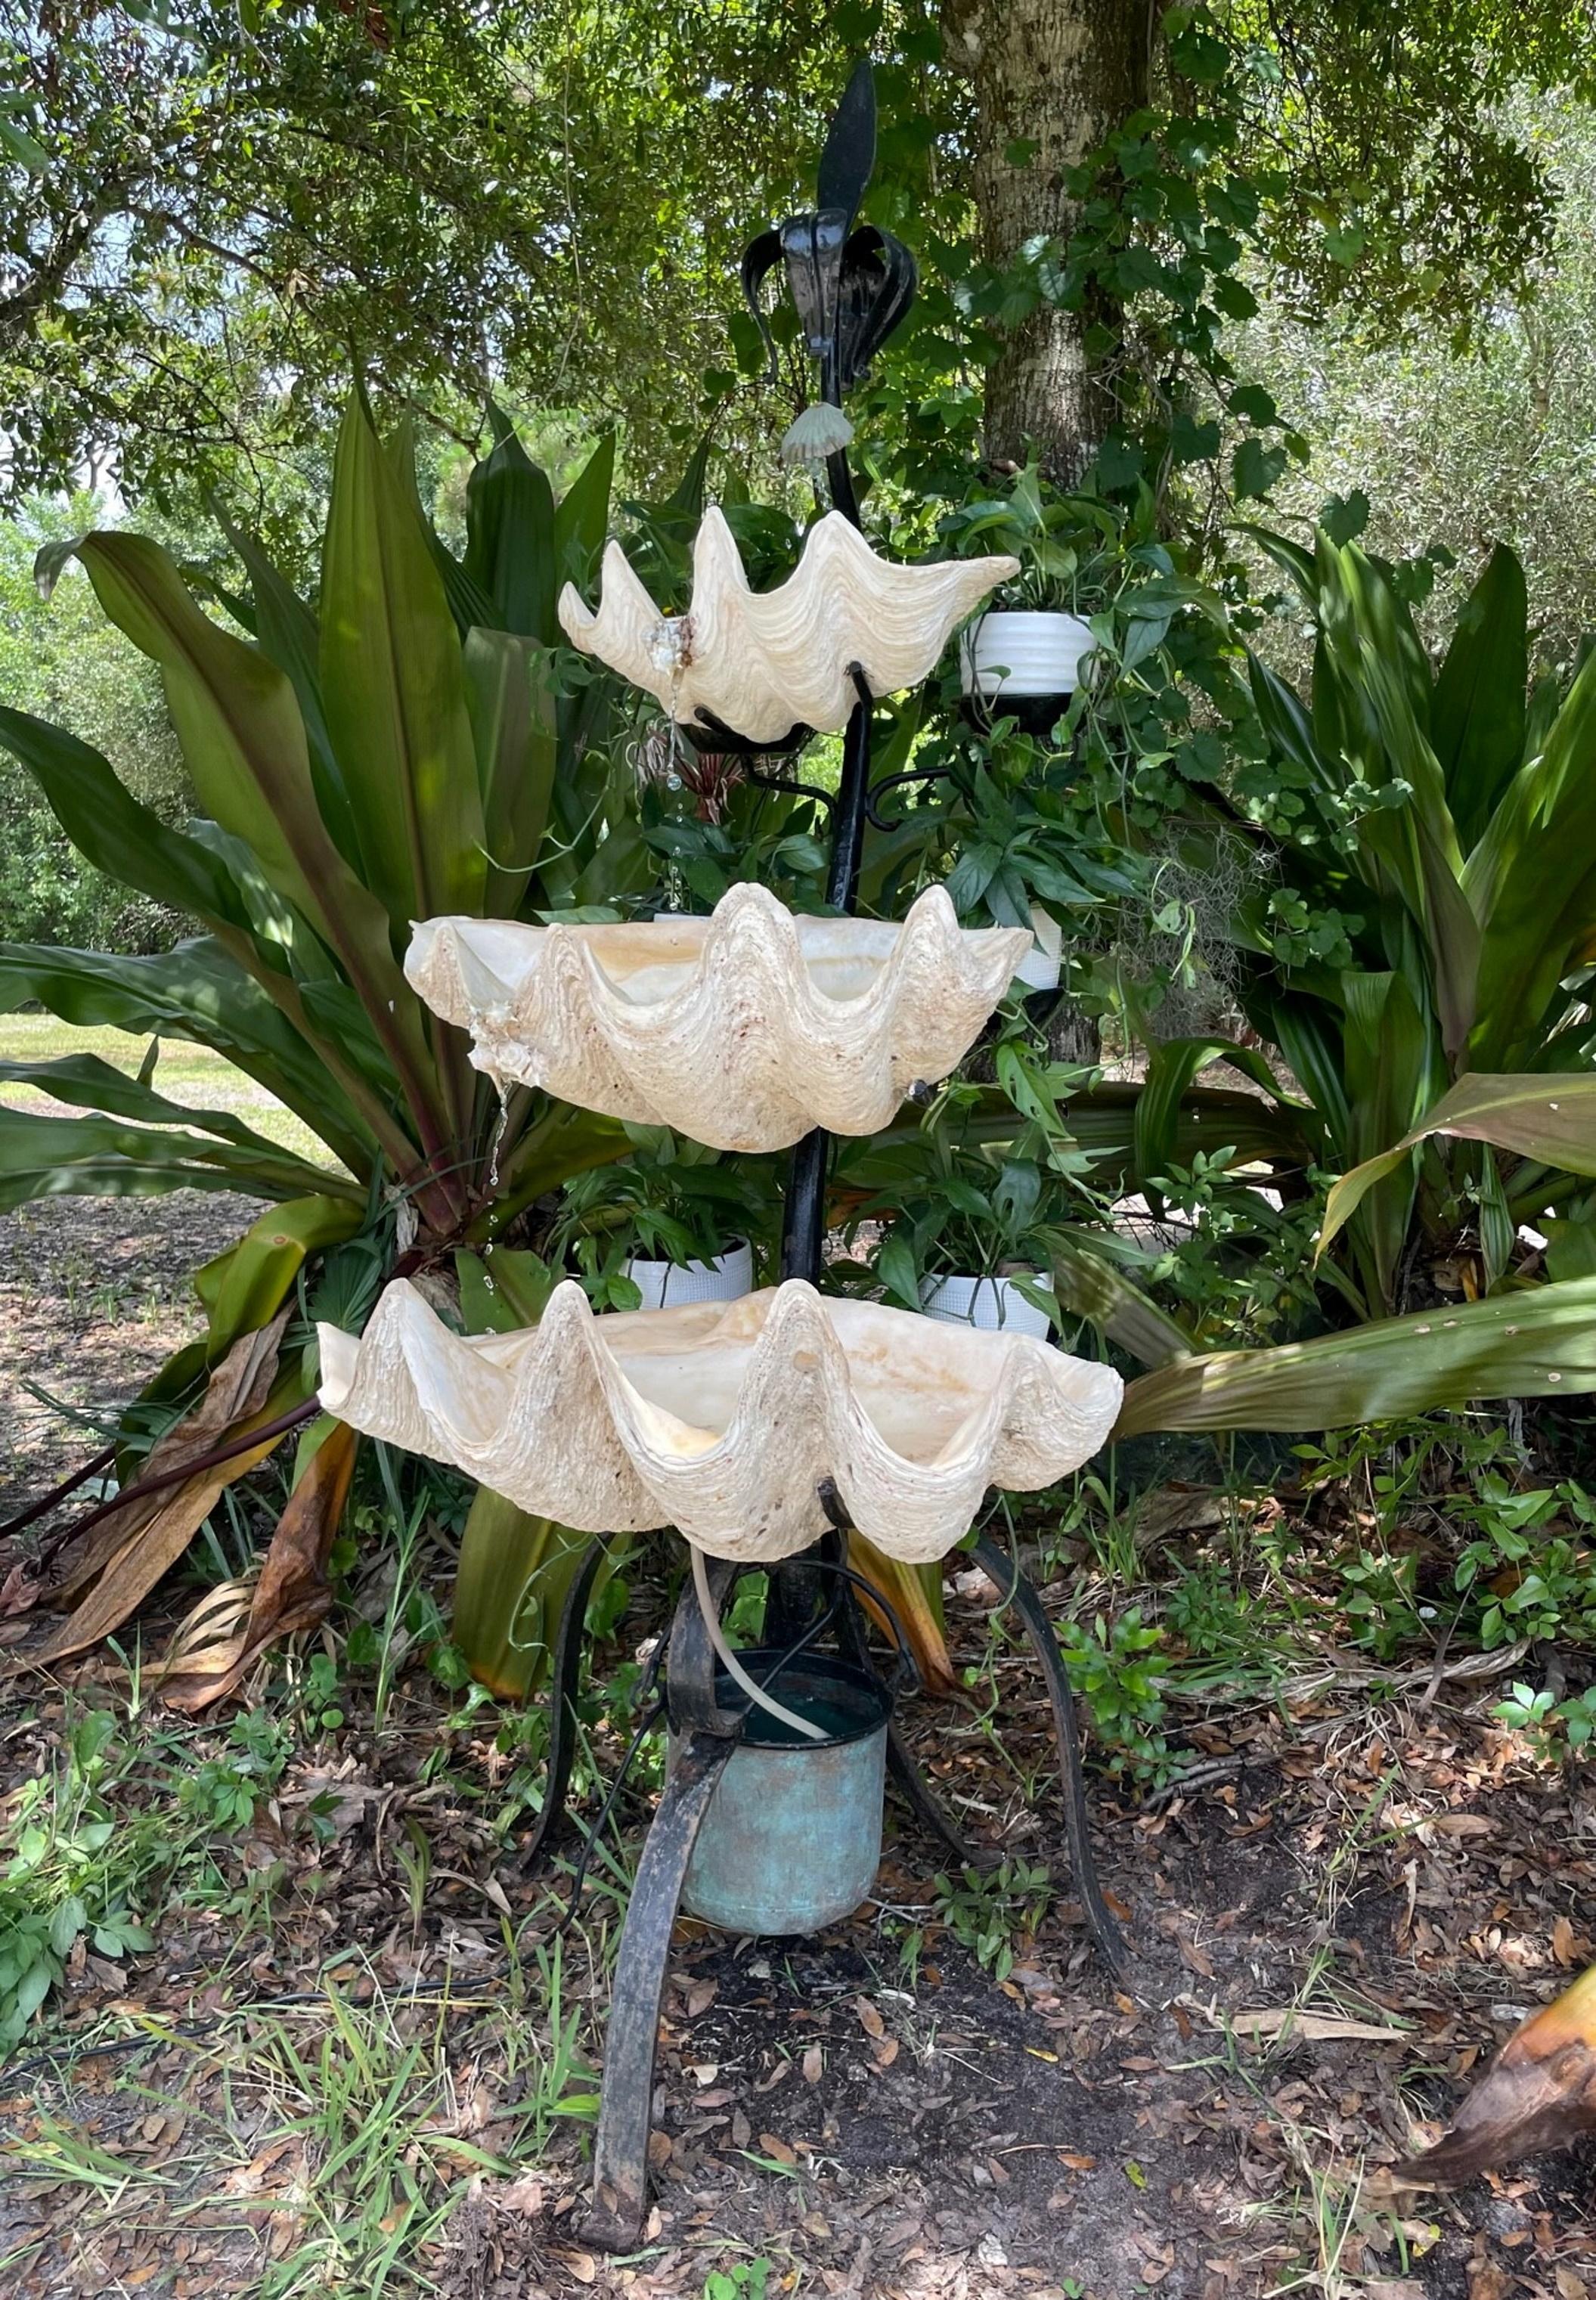 South Pacific Giant Clam Shell Three-Tiered Water Fountain.

Spectacular three-tiered water fountain with three graduated white Tridacna gigas giant clam shell specimen. A wrought iron stand with six plant trays serves as a sculptural water feature.